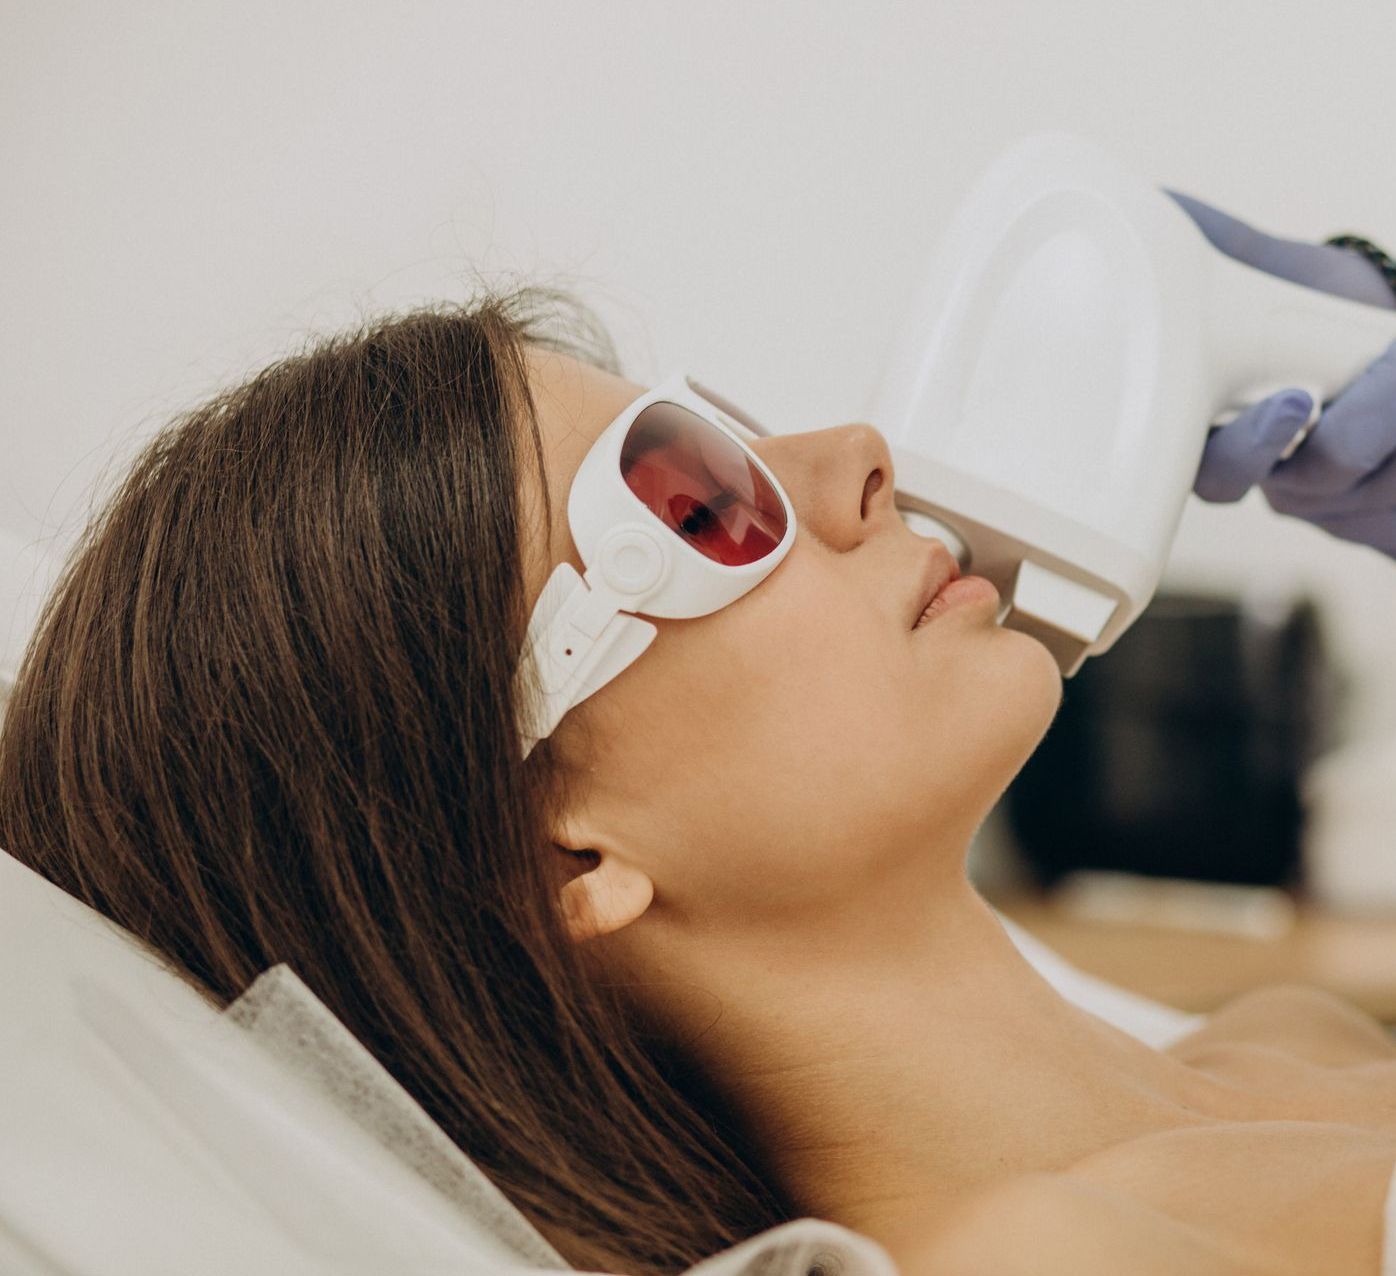 a woman is getting a laser treatment on her face